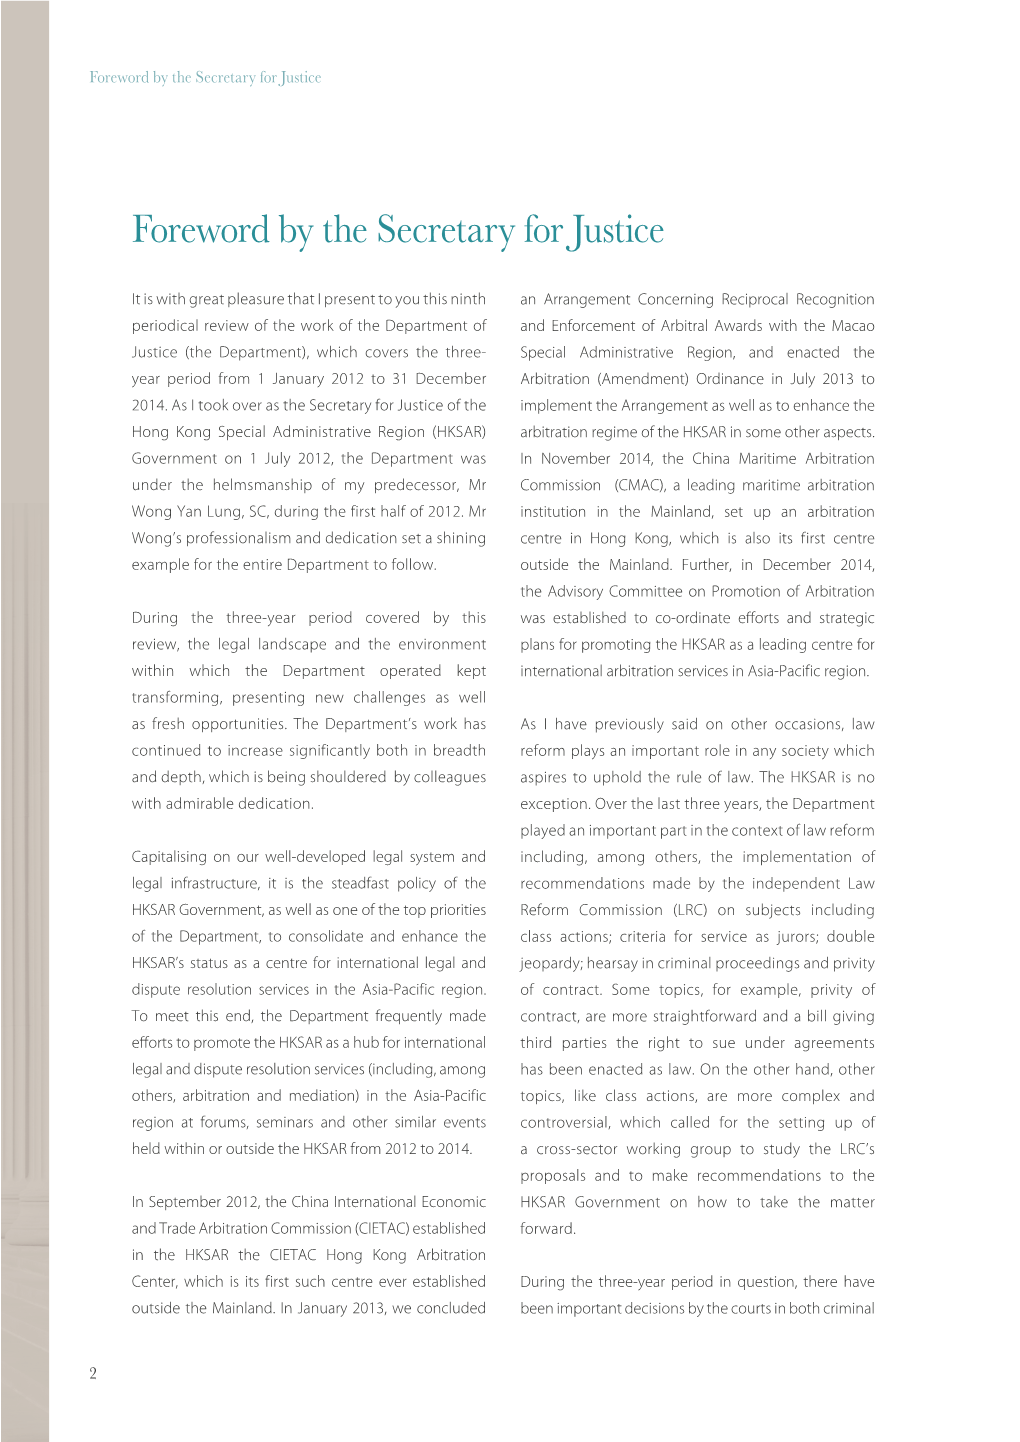 Foreword by the Secretary for Justice